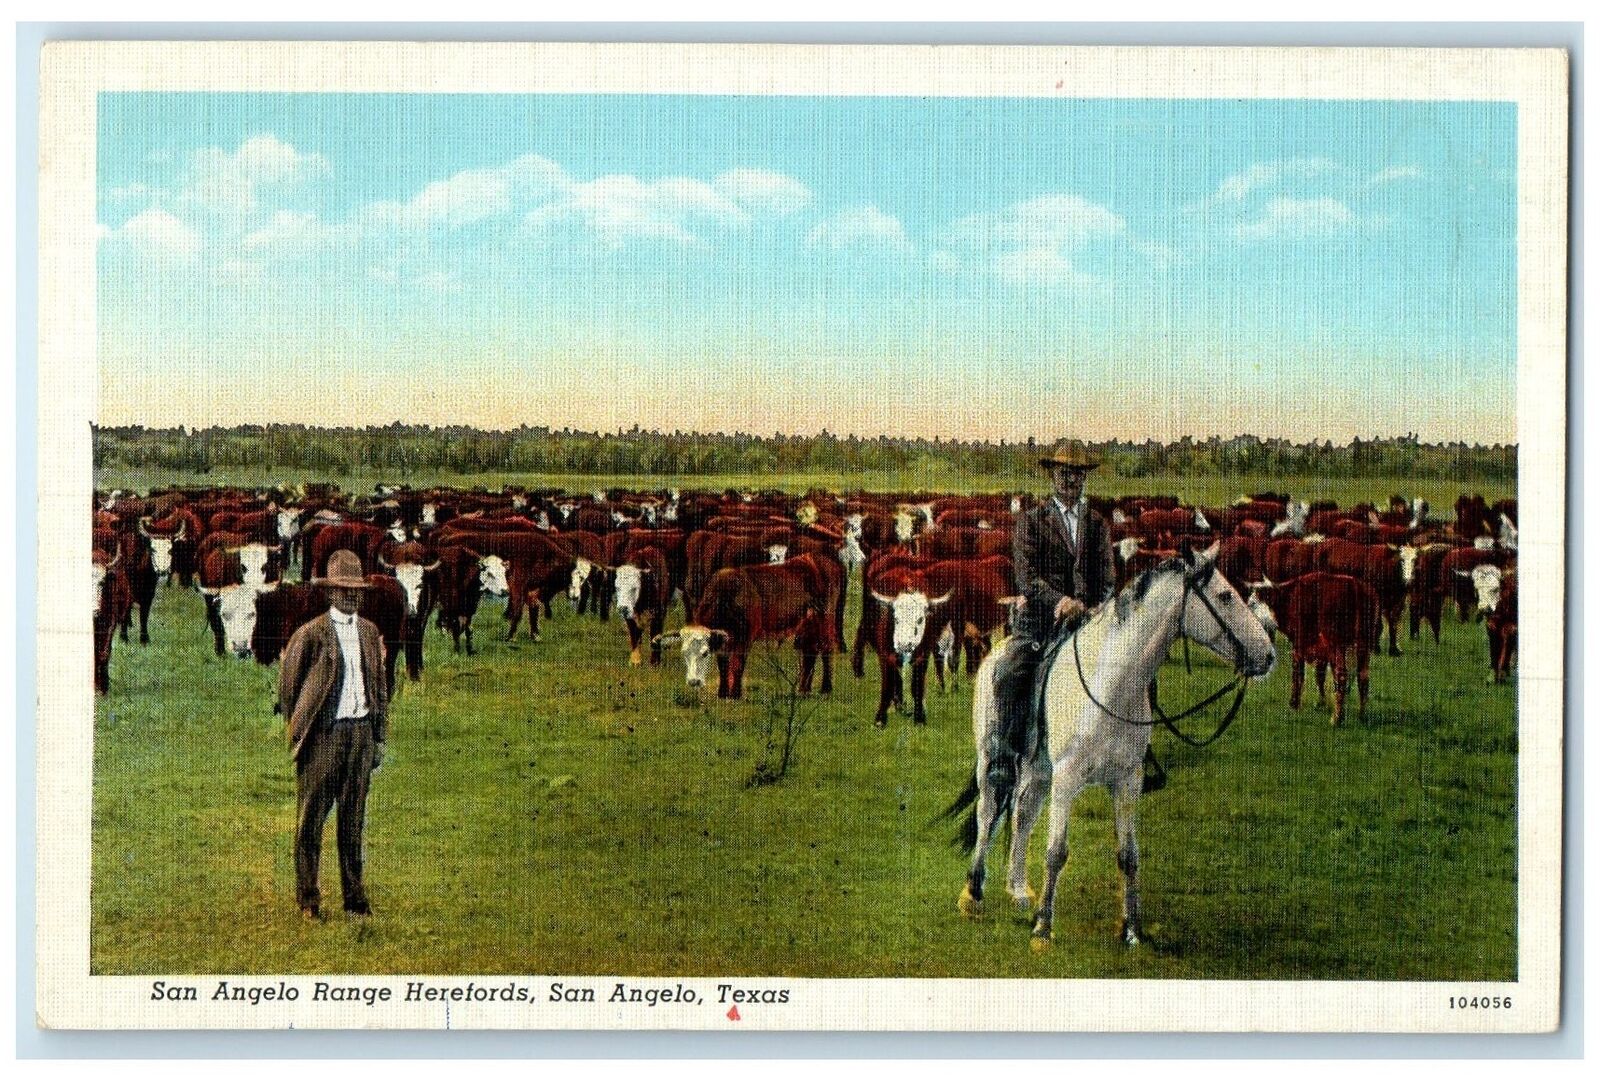 c1940 San Angelo Range Herefords Group Of Cow Man Horse Riding Texas TX Postcard